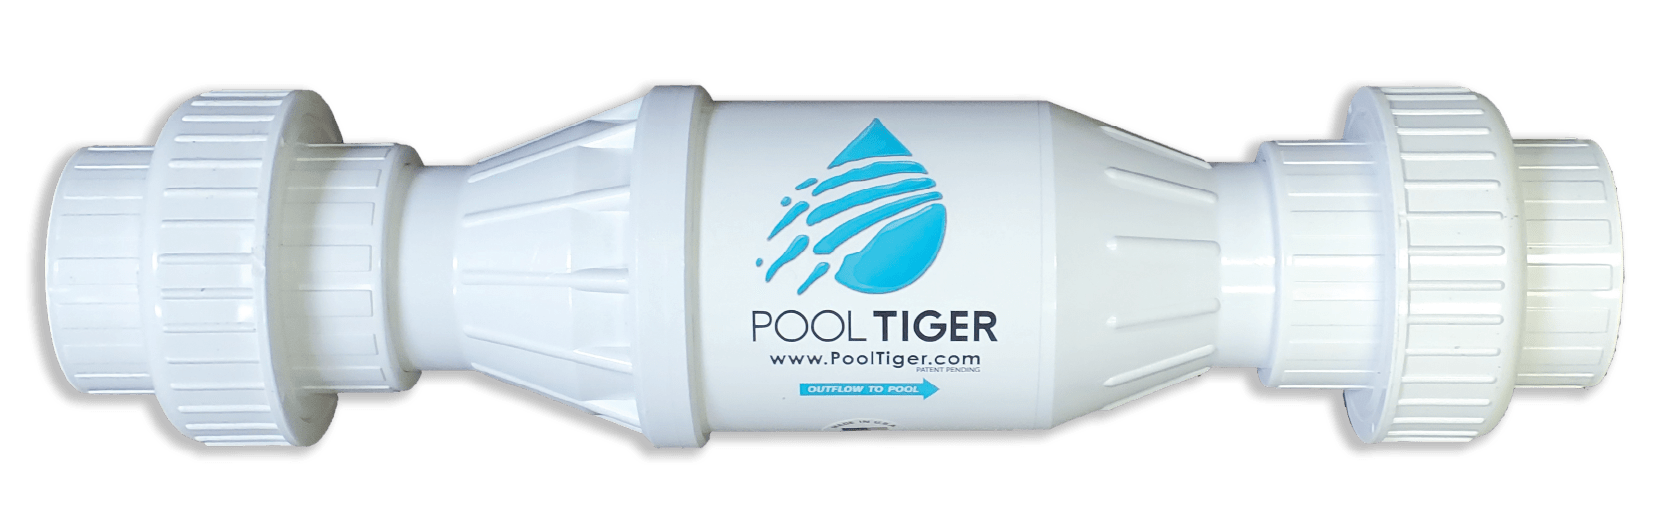 Pool Tiger product image